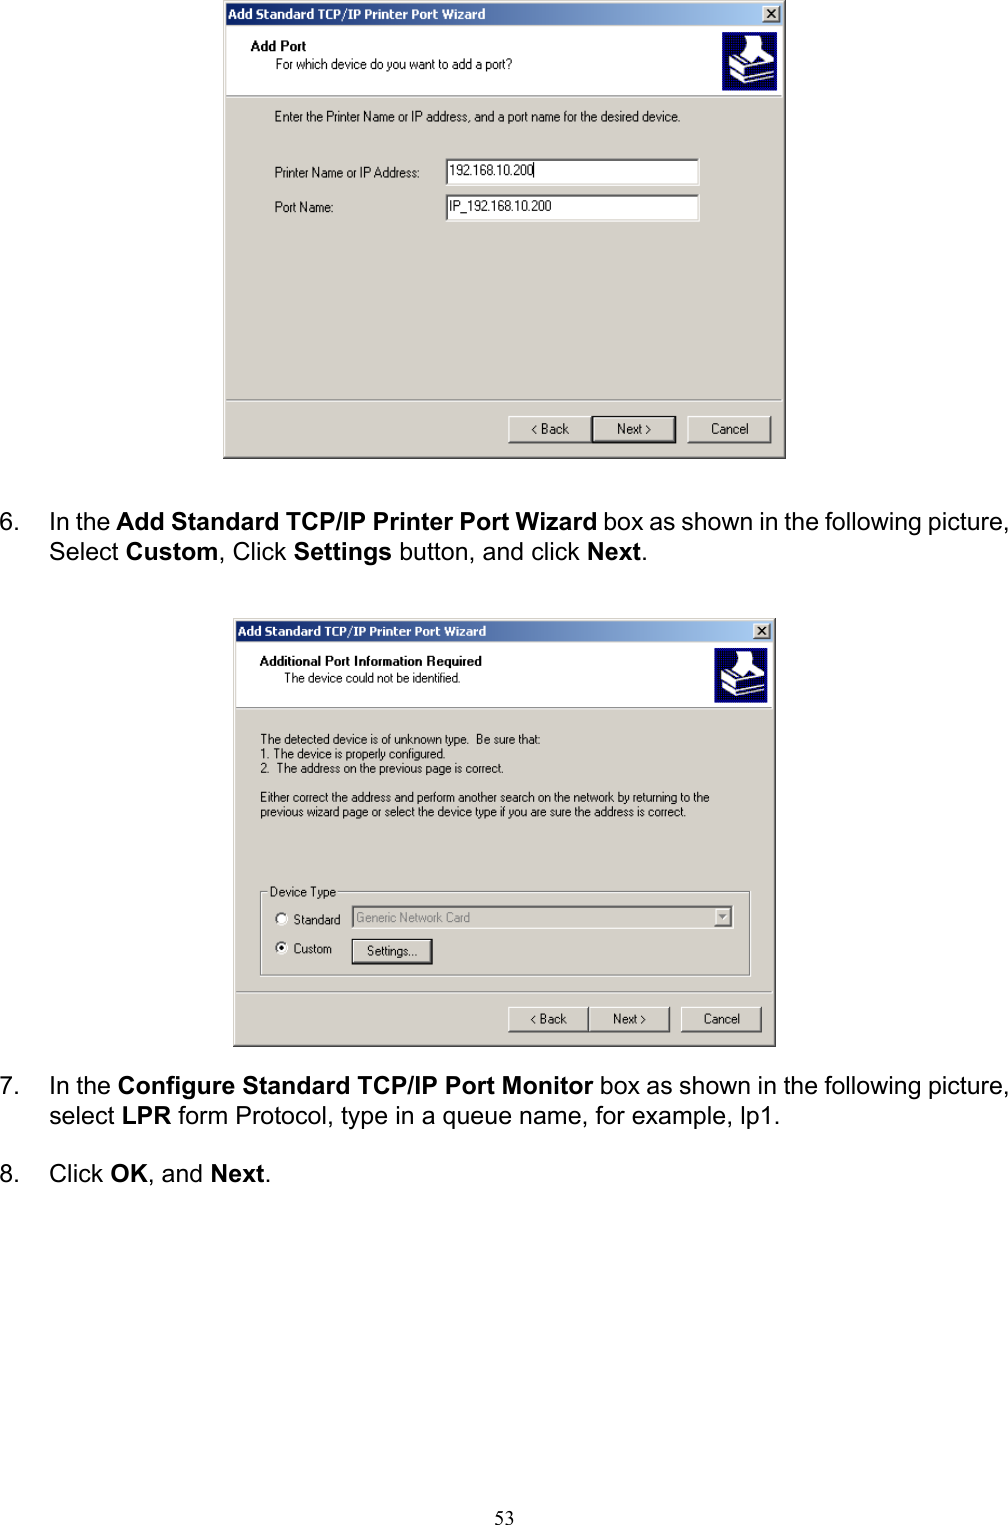                                                                                             53     6. In the Add Standard TCP/IP Printer Port Wizard box as shown in the following picture, Select Custom, Click Settings button, and click Next.     7. In the Configure Standard TCP/IP Port Monitor box as shown in the following picture, select LPR form Protocol, type in a queue name, for example, lp1.  8. Click OK, and Next.  